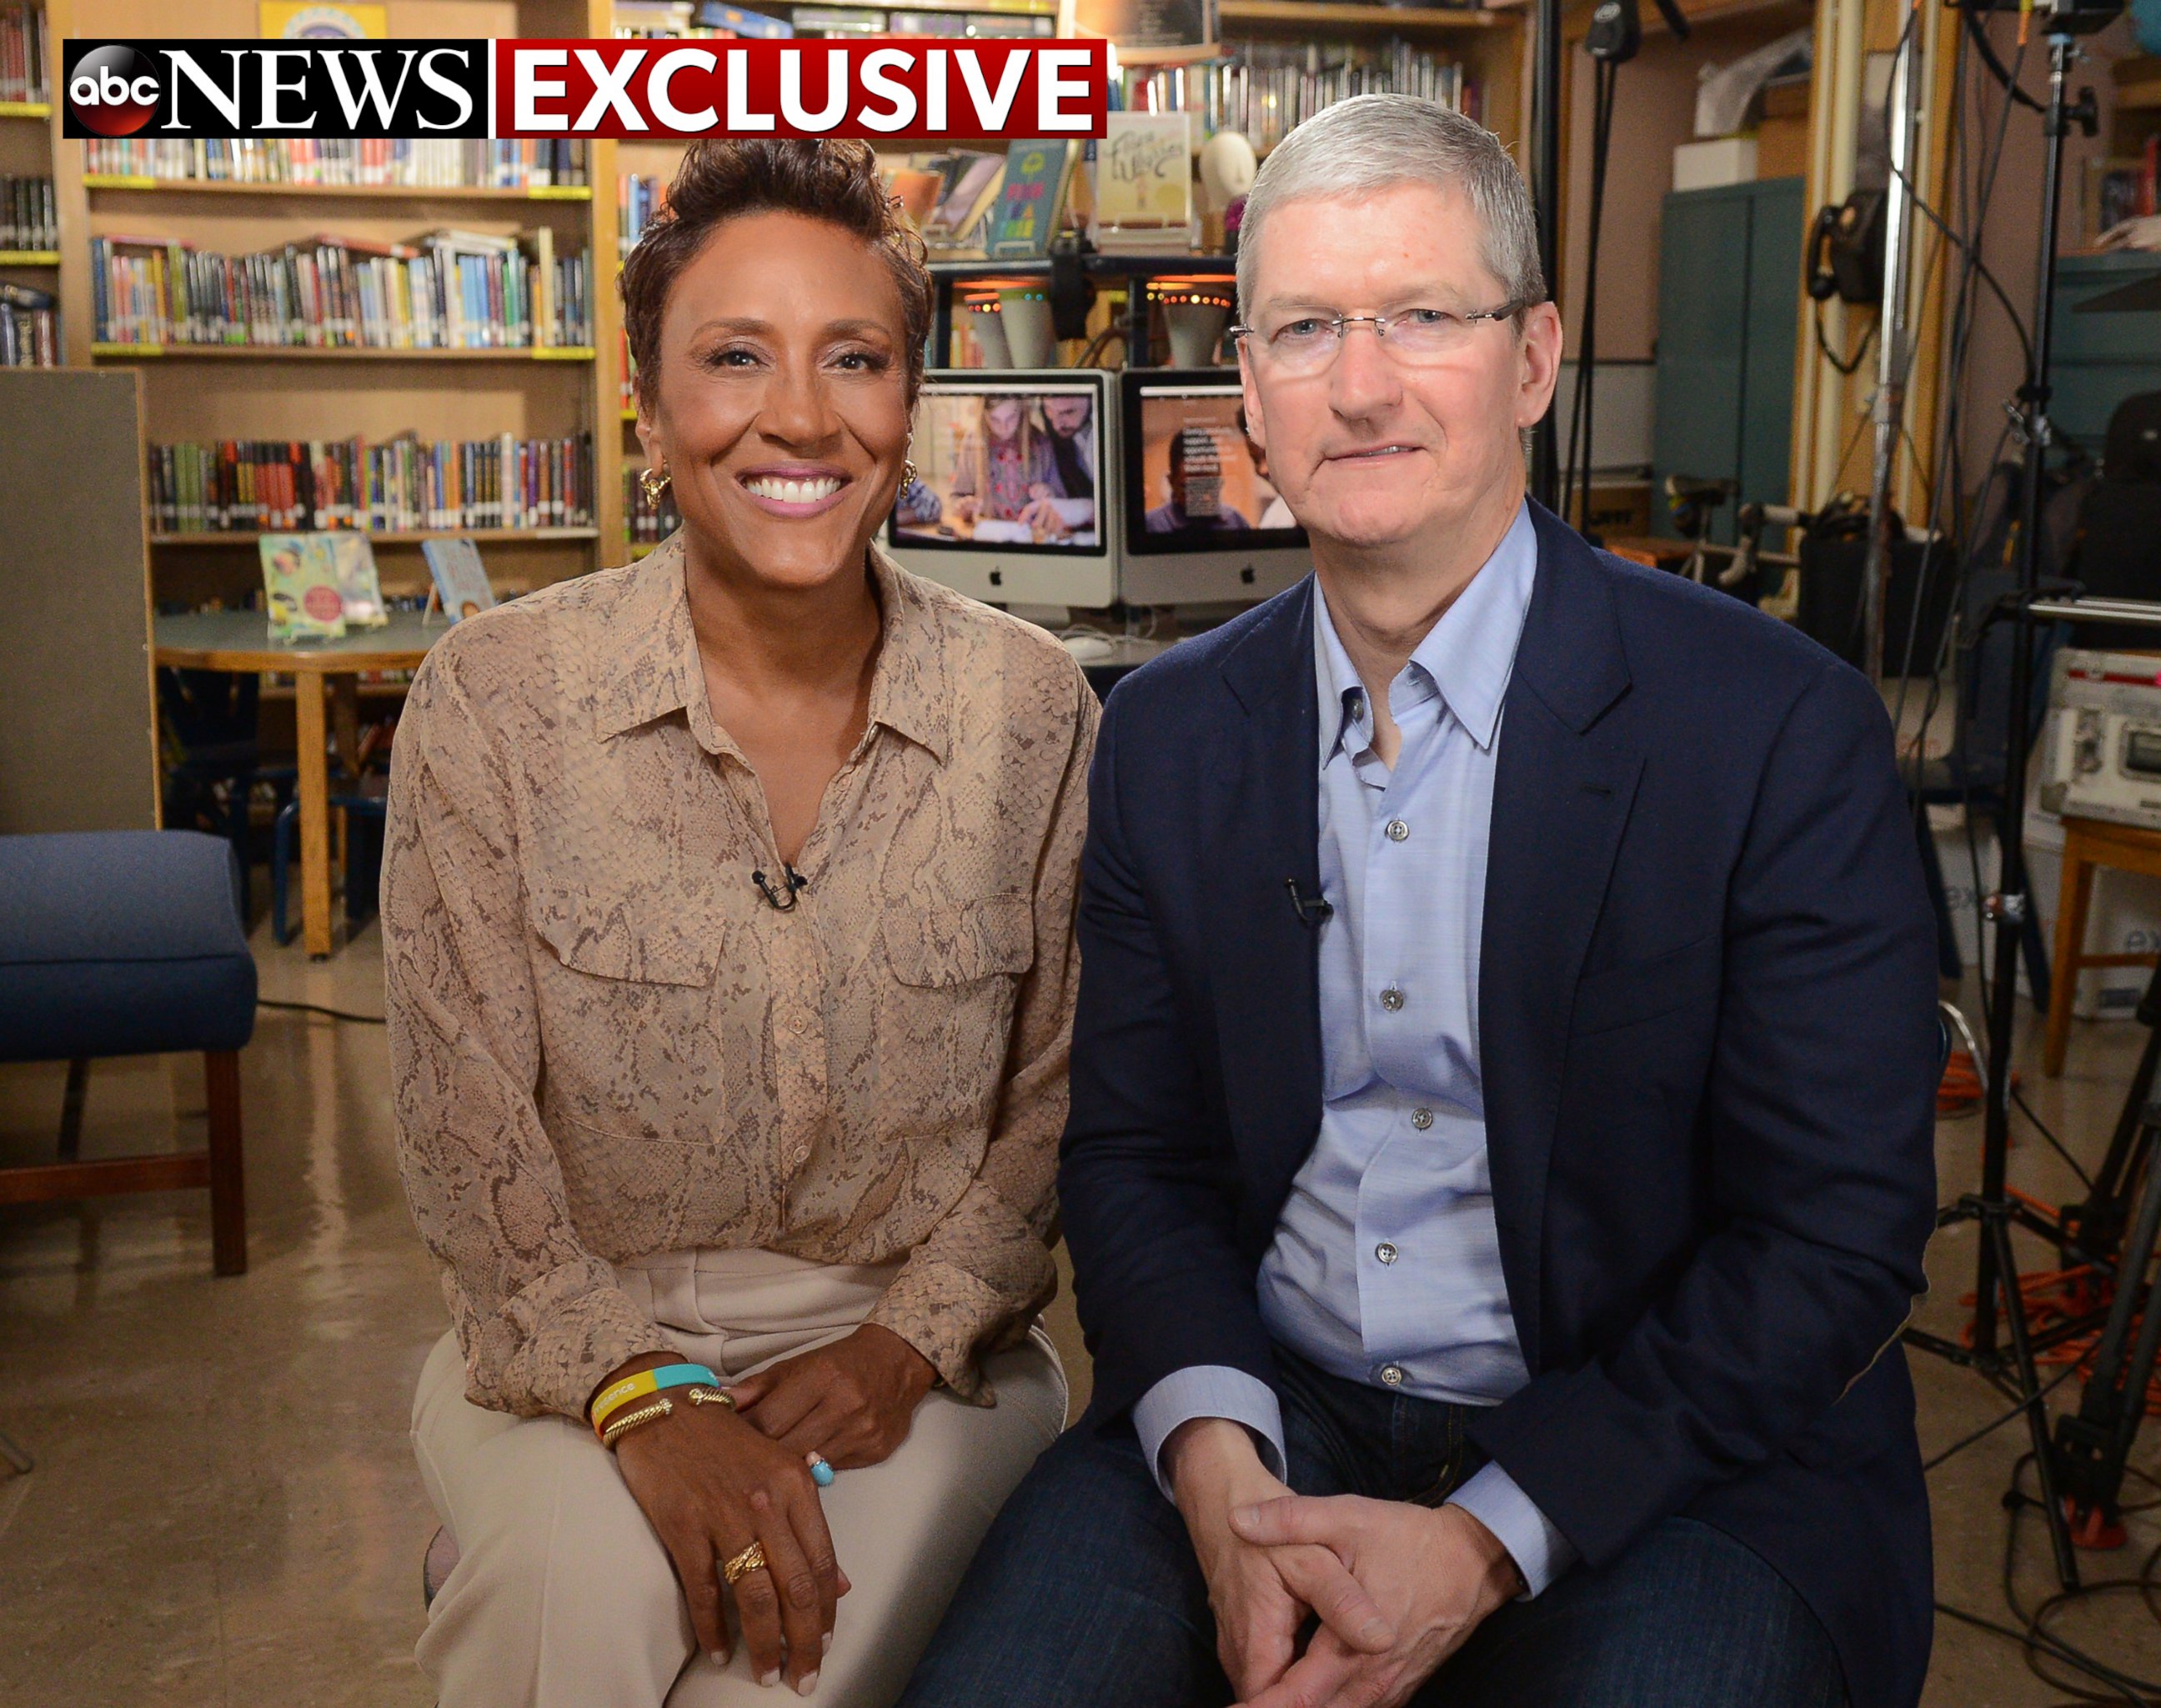 PHOTO: Robin Roberts interviews Apple CEO Tim Cook at P.S. 161 Pedro Albizu Campos School in Harlem for an interview that will air on "Good Morning America," 9/14/16.